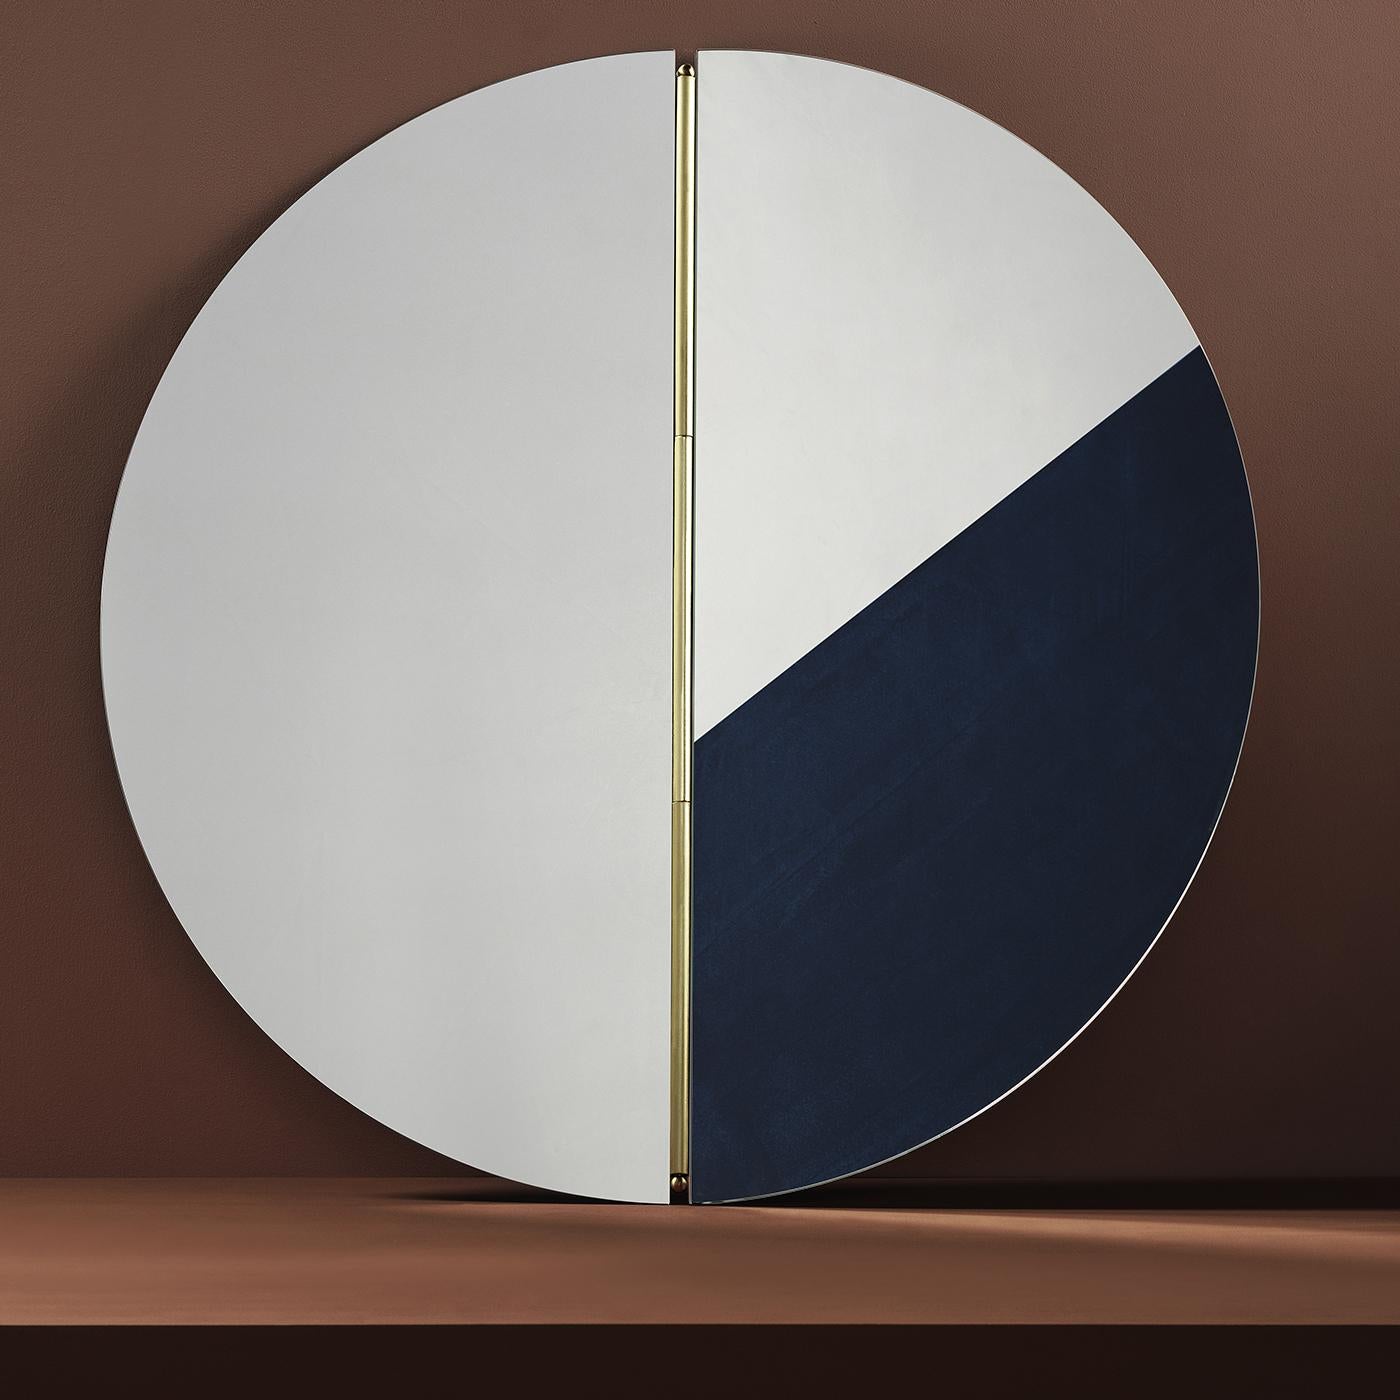 This mirror embodies pure functionality and minimalist design. Versatile and elegant in its simplicity, the round shape is entirely unadorned and divided into two halves: one is fixed while the other is adjustable to create geometric sections.